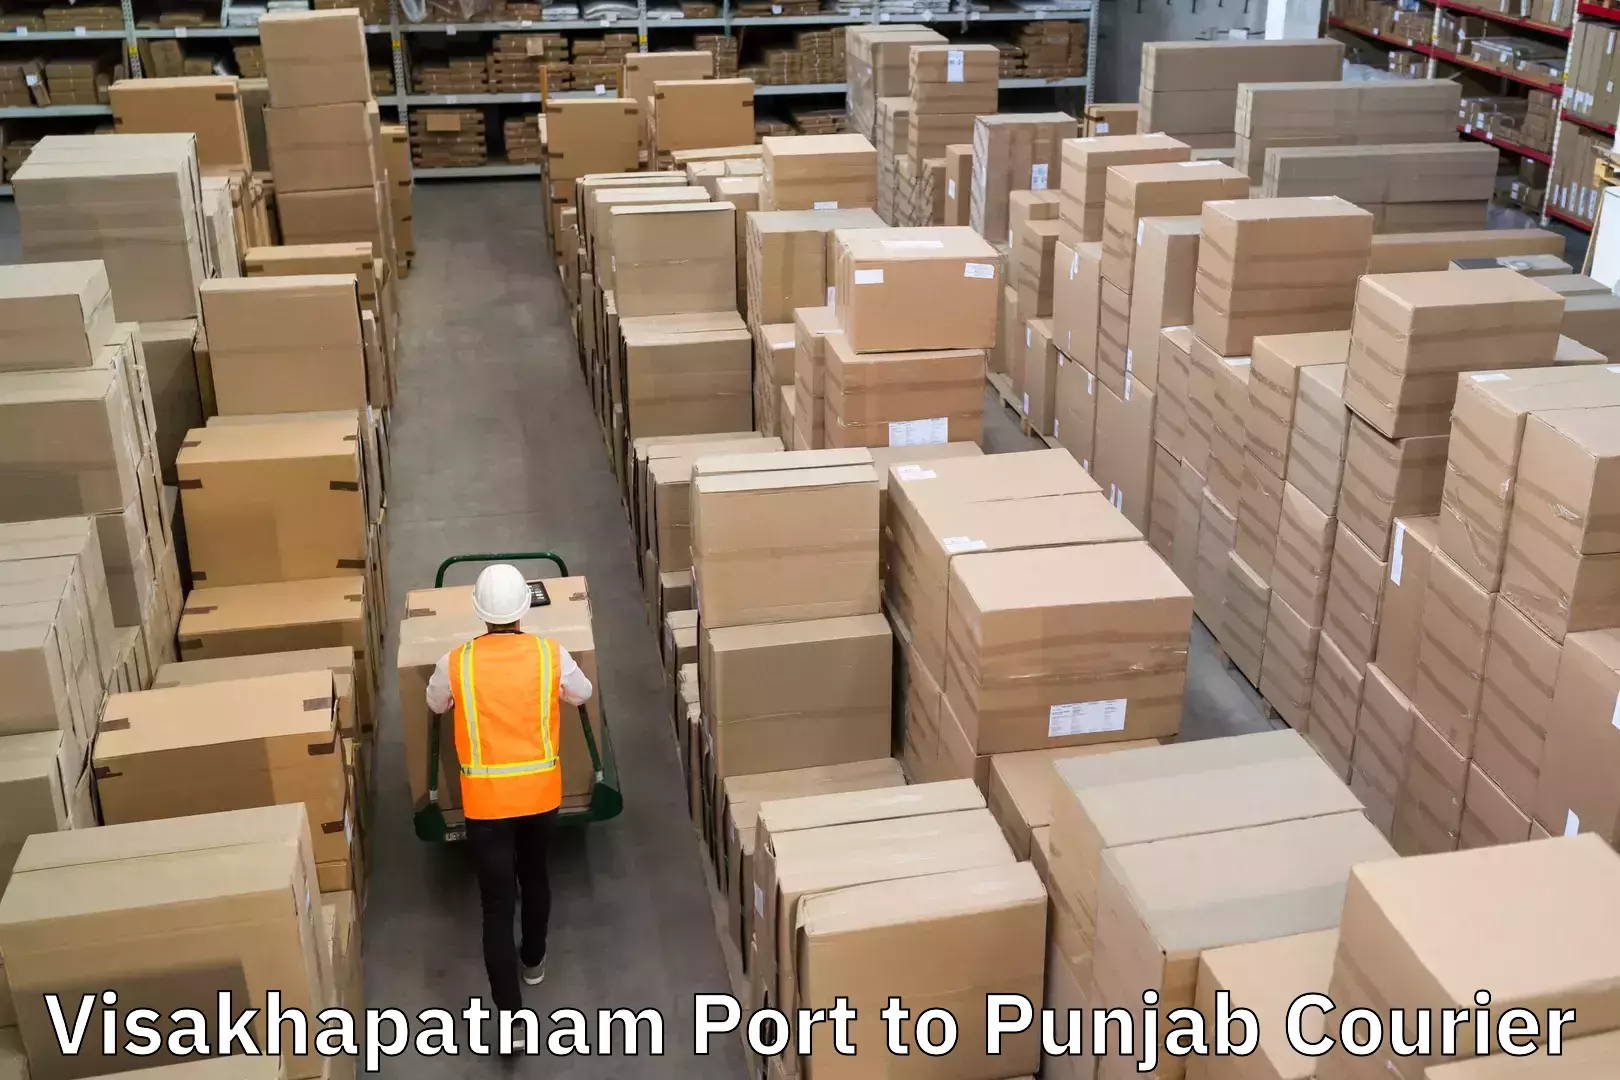 Next-day delivery options in Visakhapatnam Port to Punjab